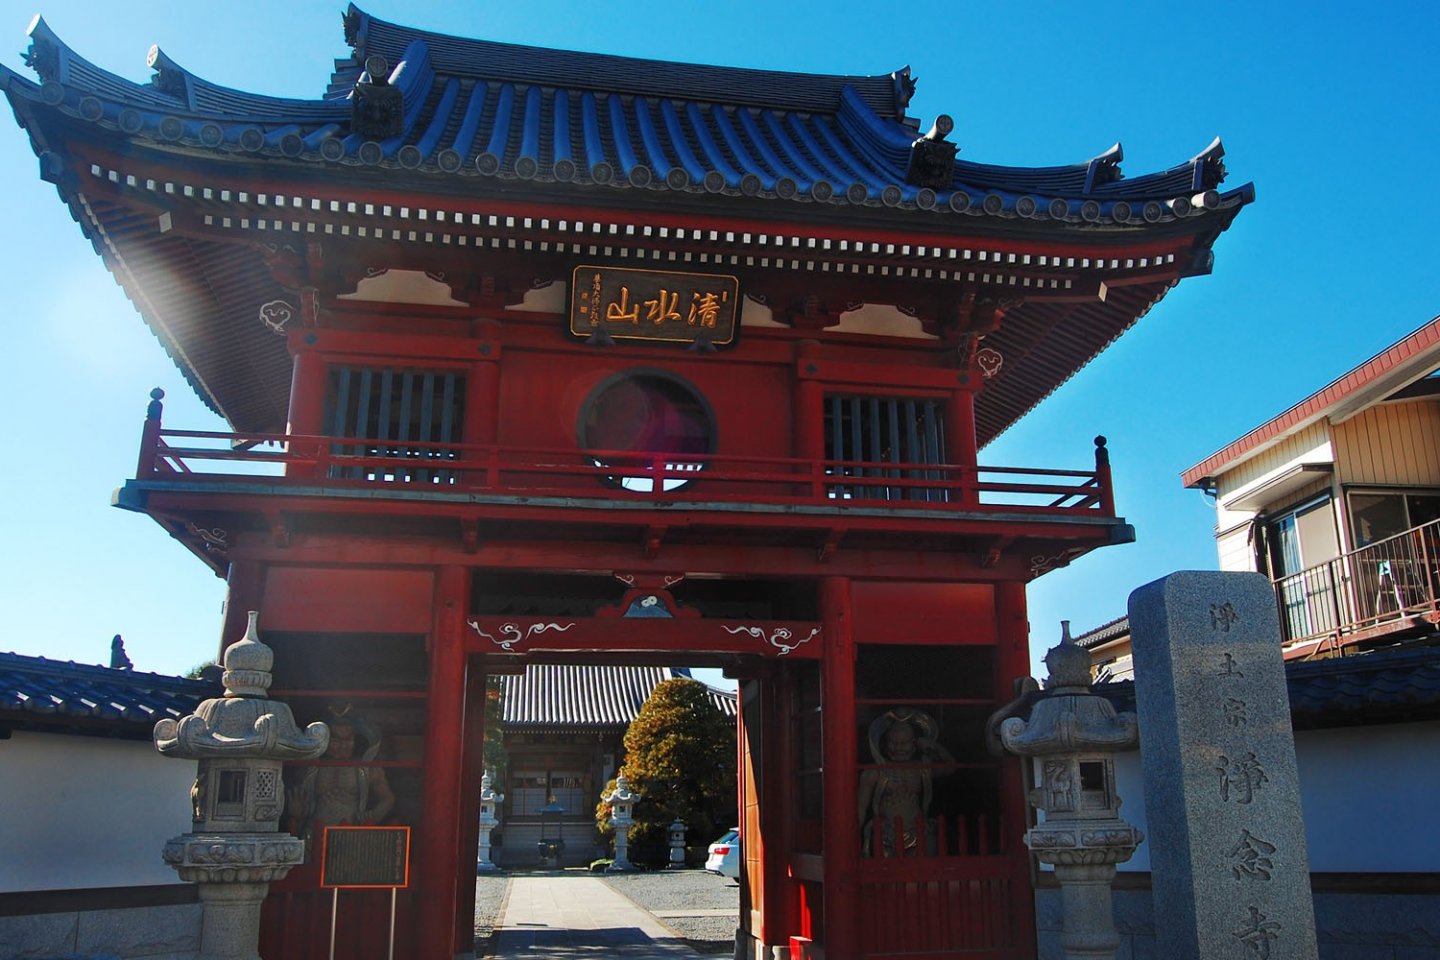 The iconic red gate of Jonen-ji Temple, built in 1701.